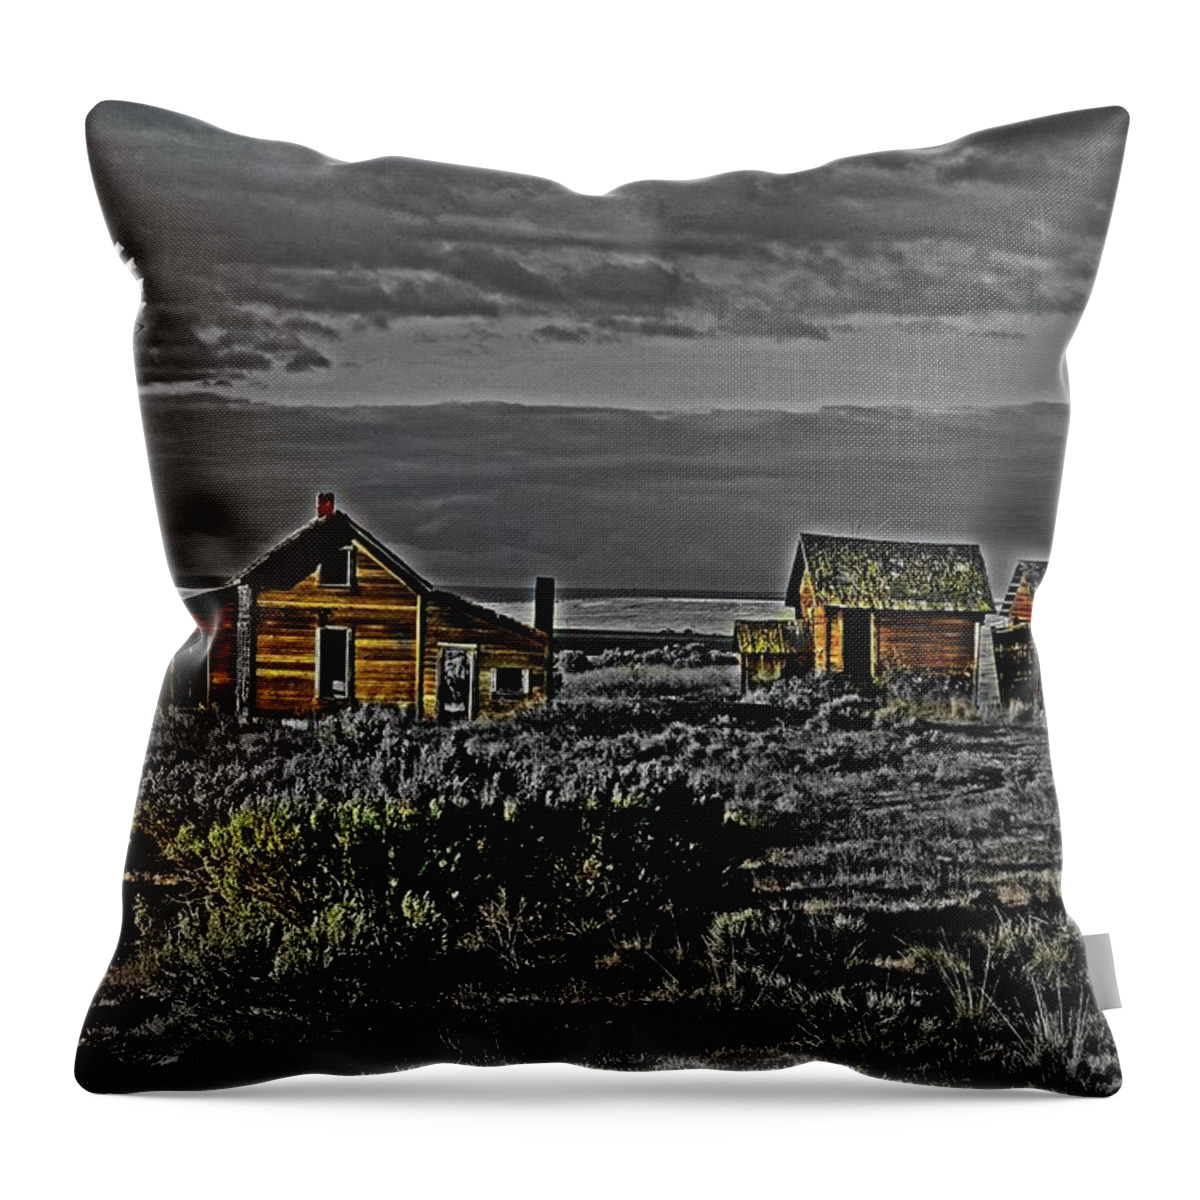  Throw Pillow featuring the digital art Homestead Along The Oregon Trail by Fred Loring